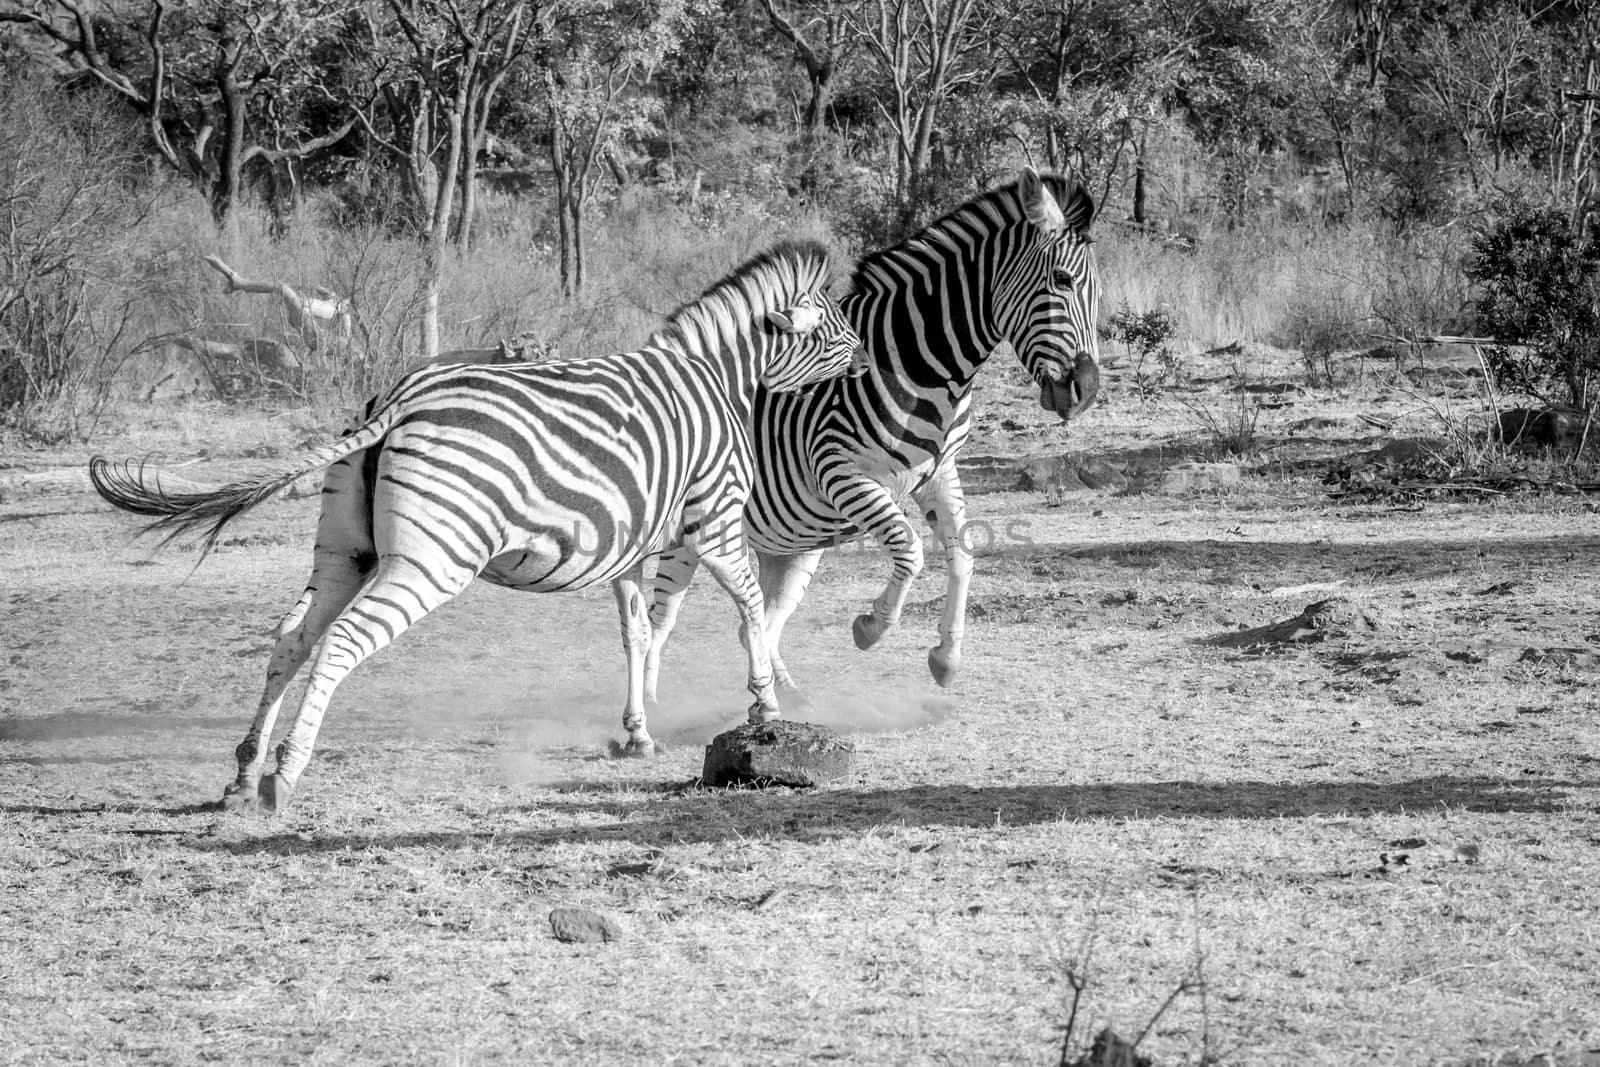 Two Zebras fighting on a plain in black and white in the Welgevonden game reserve, South Africa.